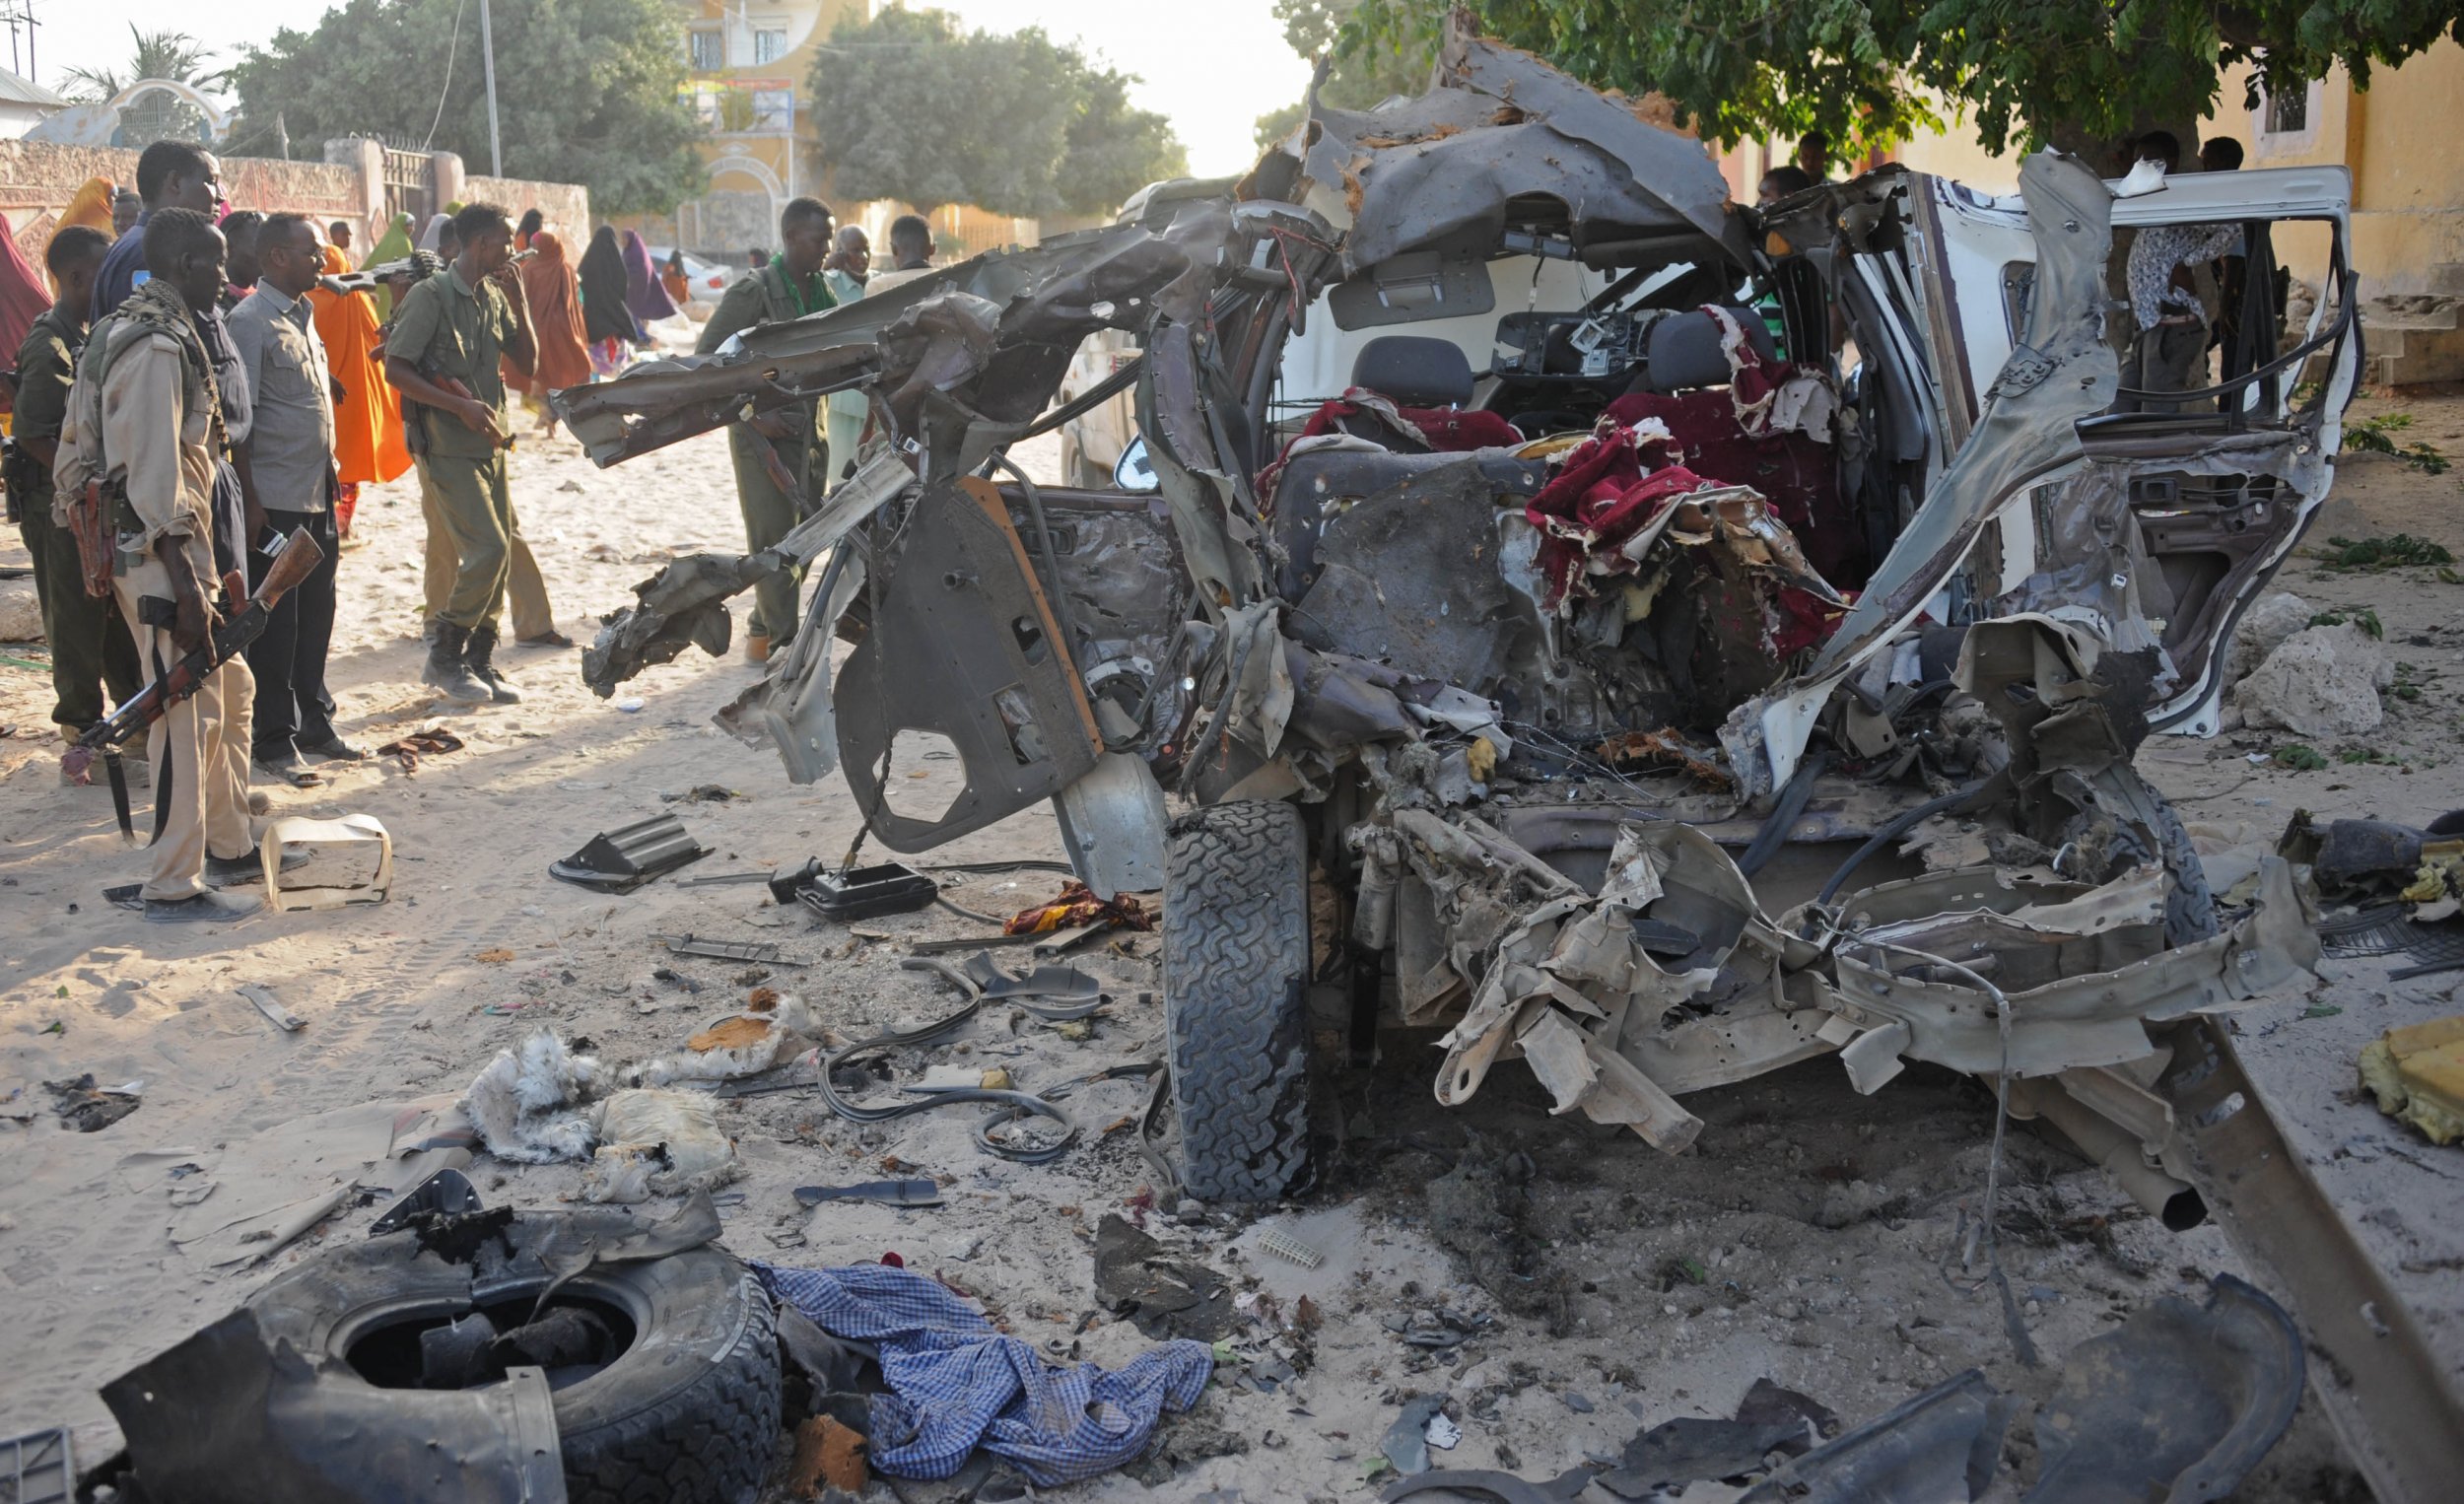 Somali soldiers and residents look at the site of an Al-Shabab car bomb in Mogadishu.